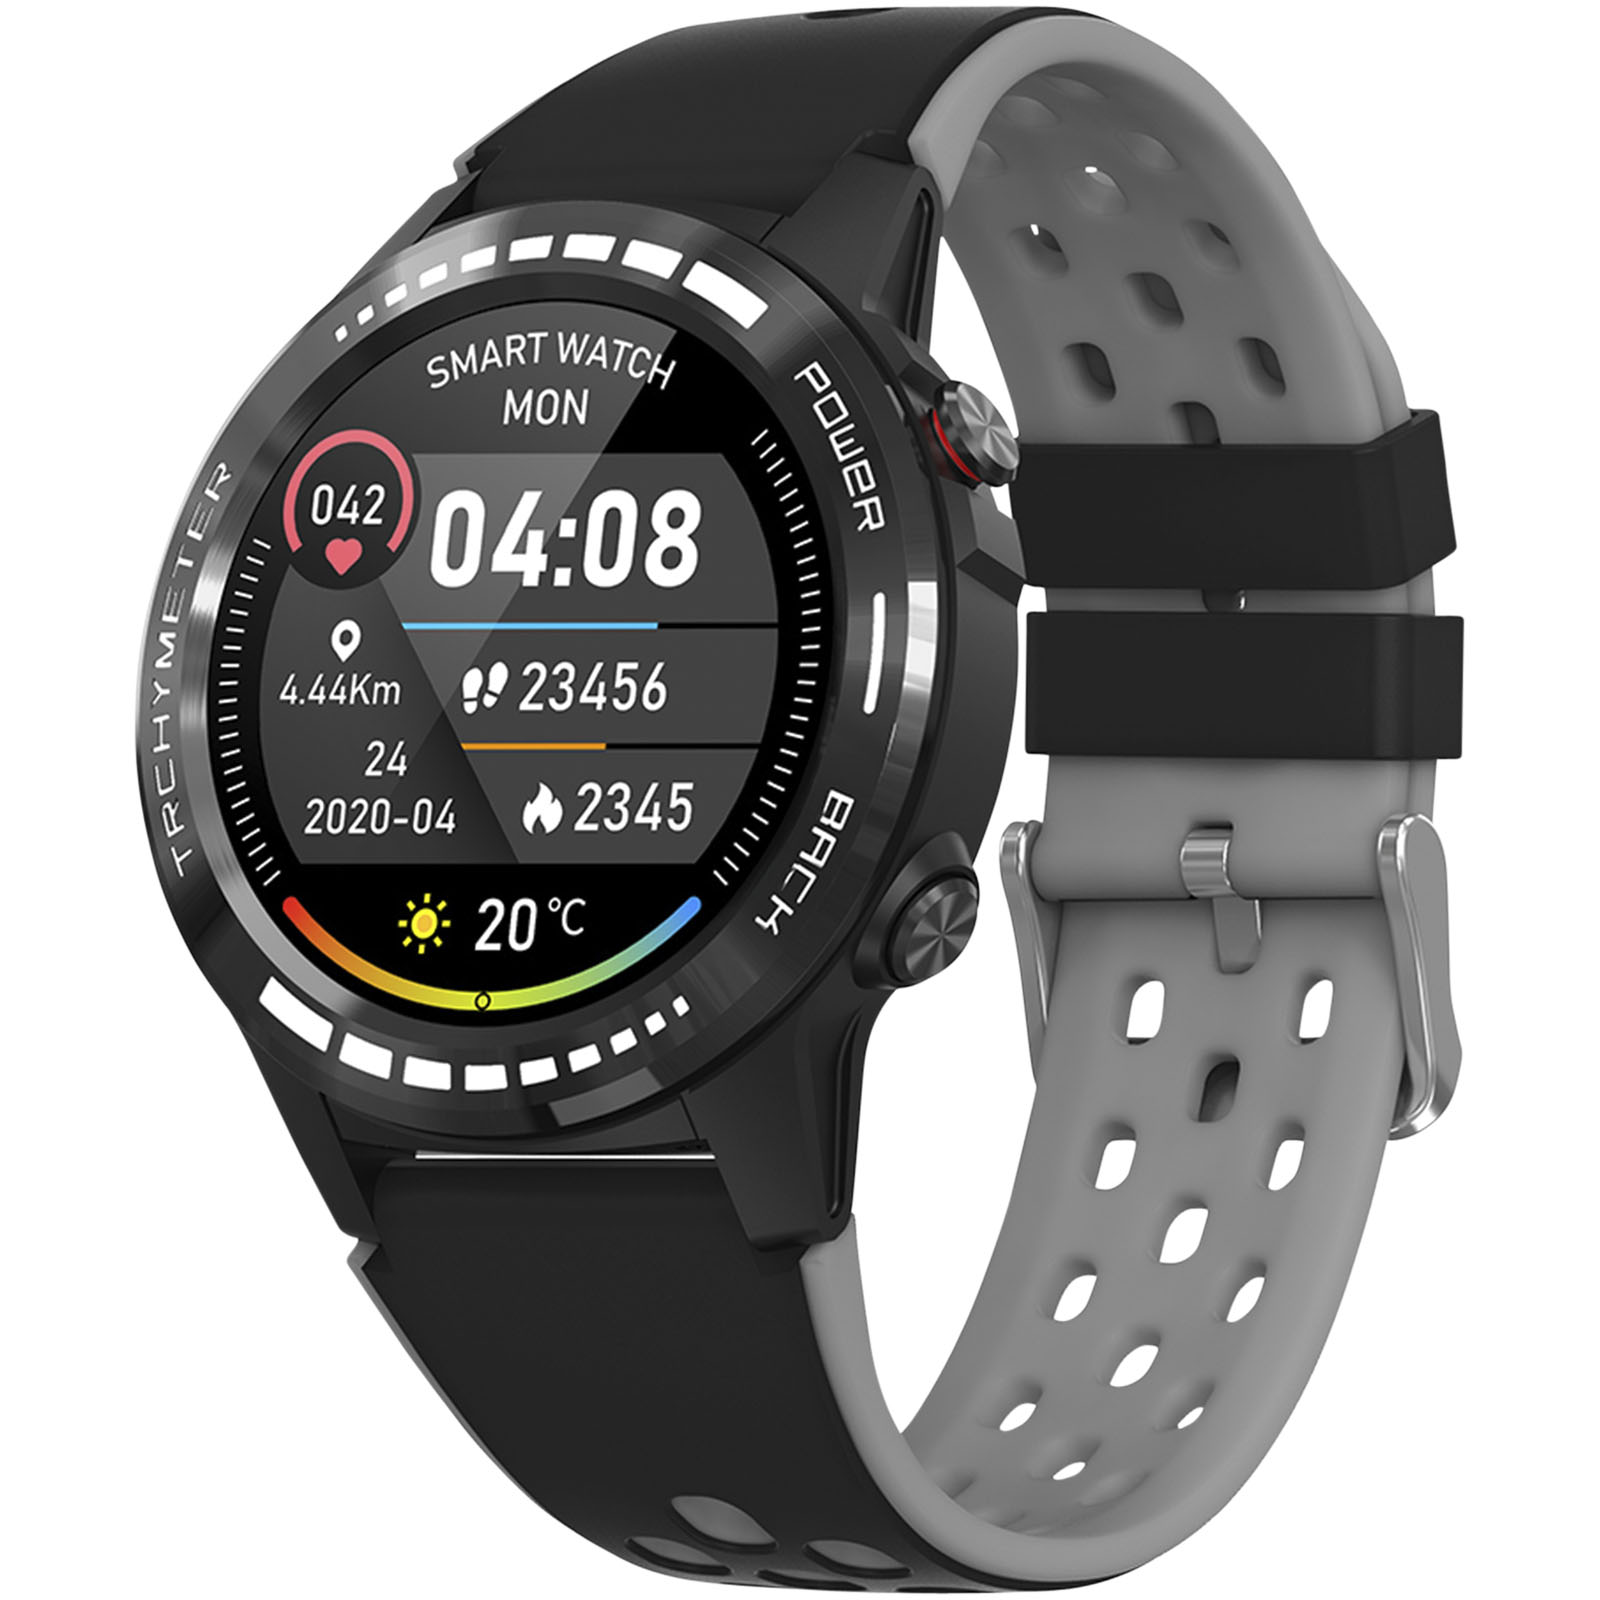 GPS Smartwatch with Heart Rate Monitor, Sleep Tracker, and Siri Voice Assistant - Bedford